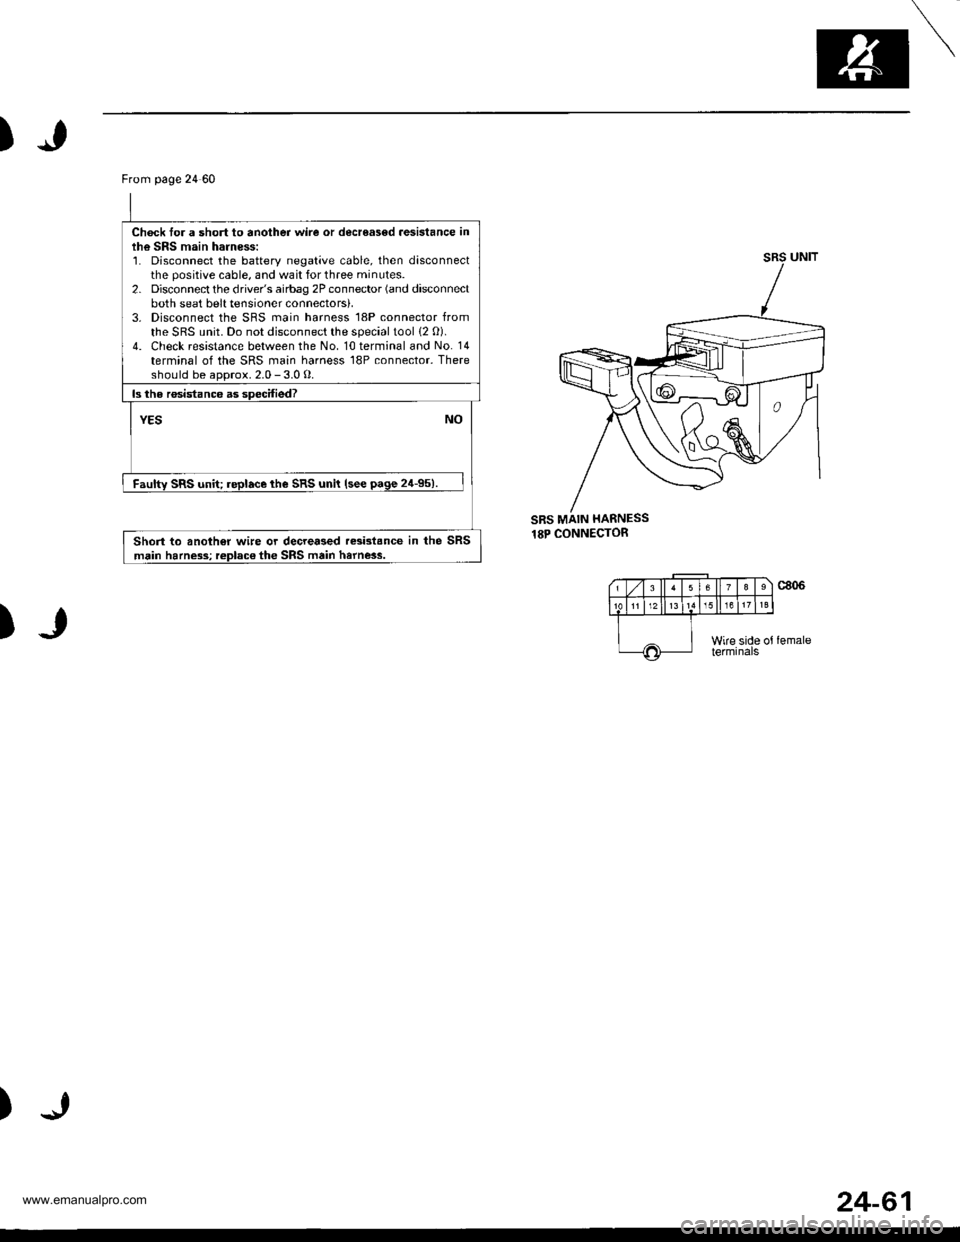 HONDA CR-V 2000 RD1-RD3 / 1.G Service Manual 
)
SRS MAIN HARNESS18P CONNECTOR
)
)
From page 24 60
Ch6ck tor a short to another wire or decreasod aGsistance inlh€ SRS main harness:1. Disconnect the battery negative cable, then disconnectthe pos